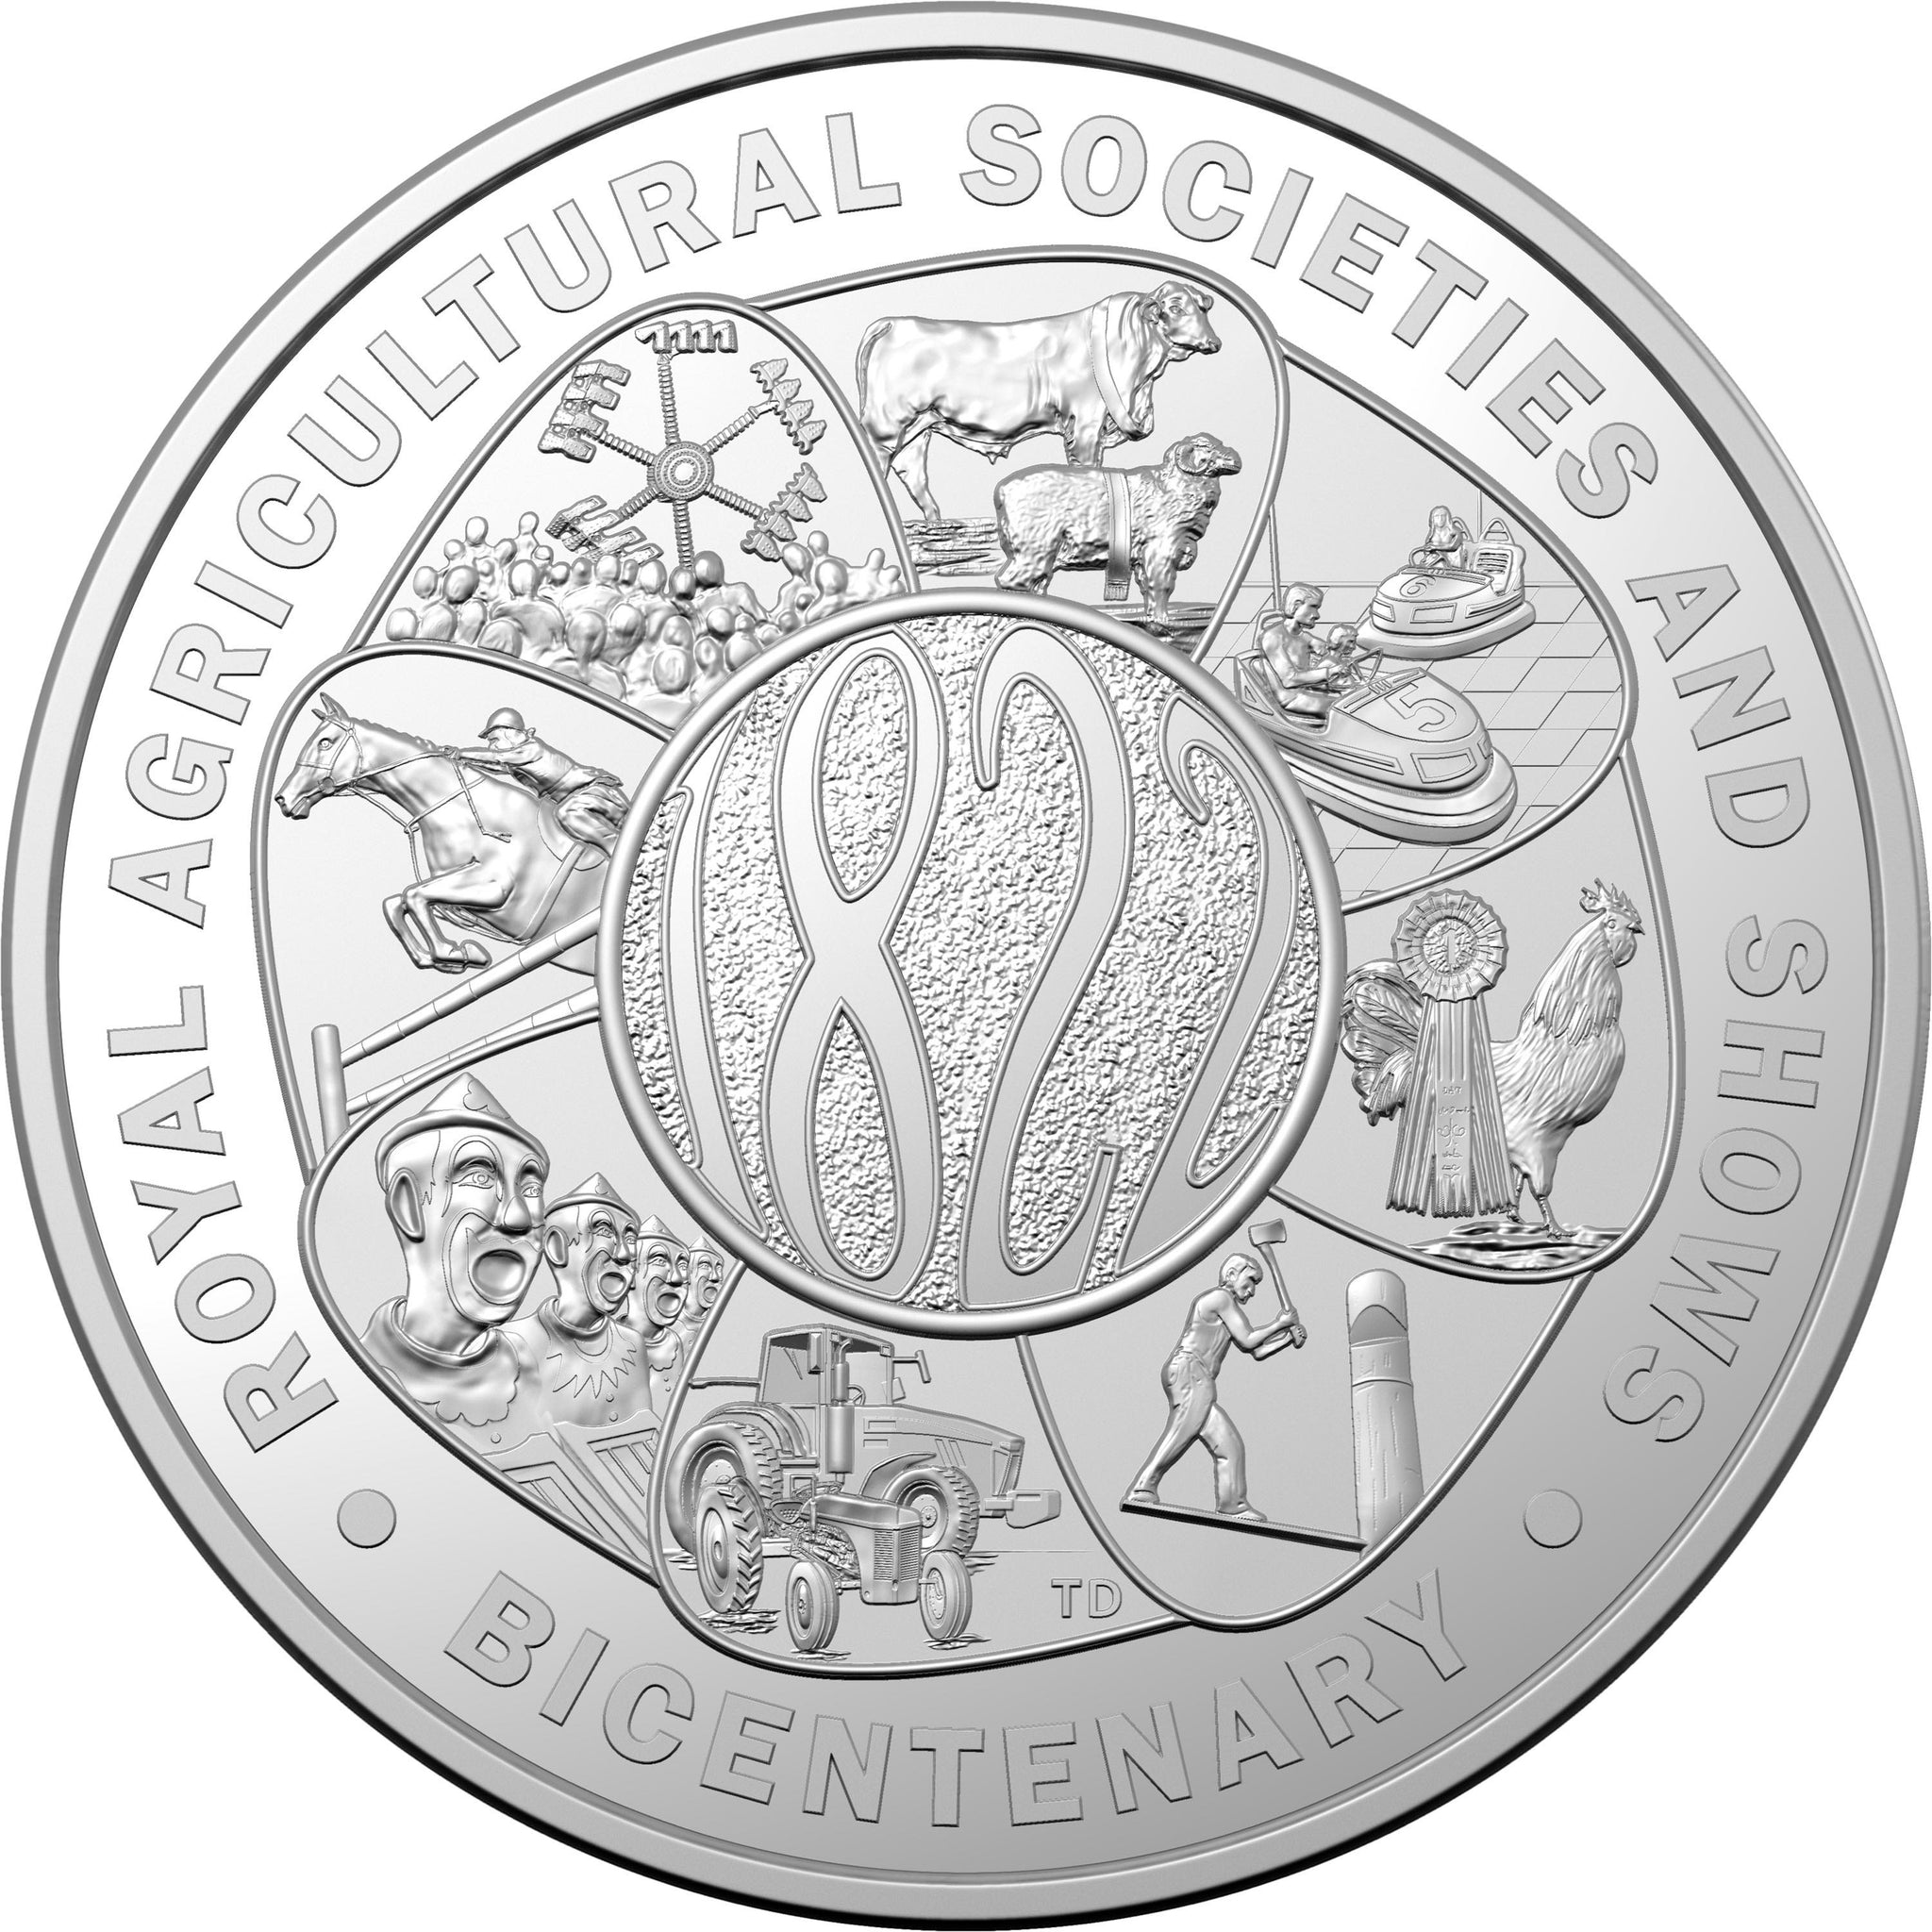 2022 Royal Agricultural Societies and Shows $5 Silver Proof Coin